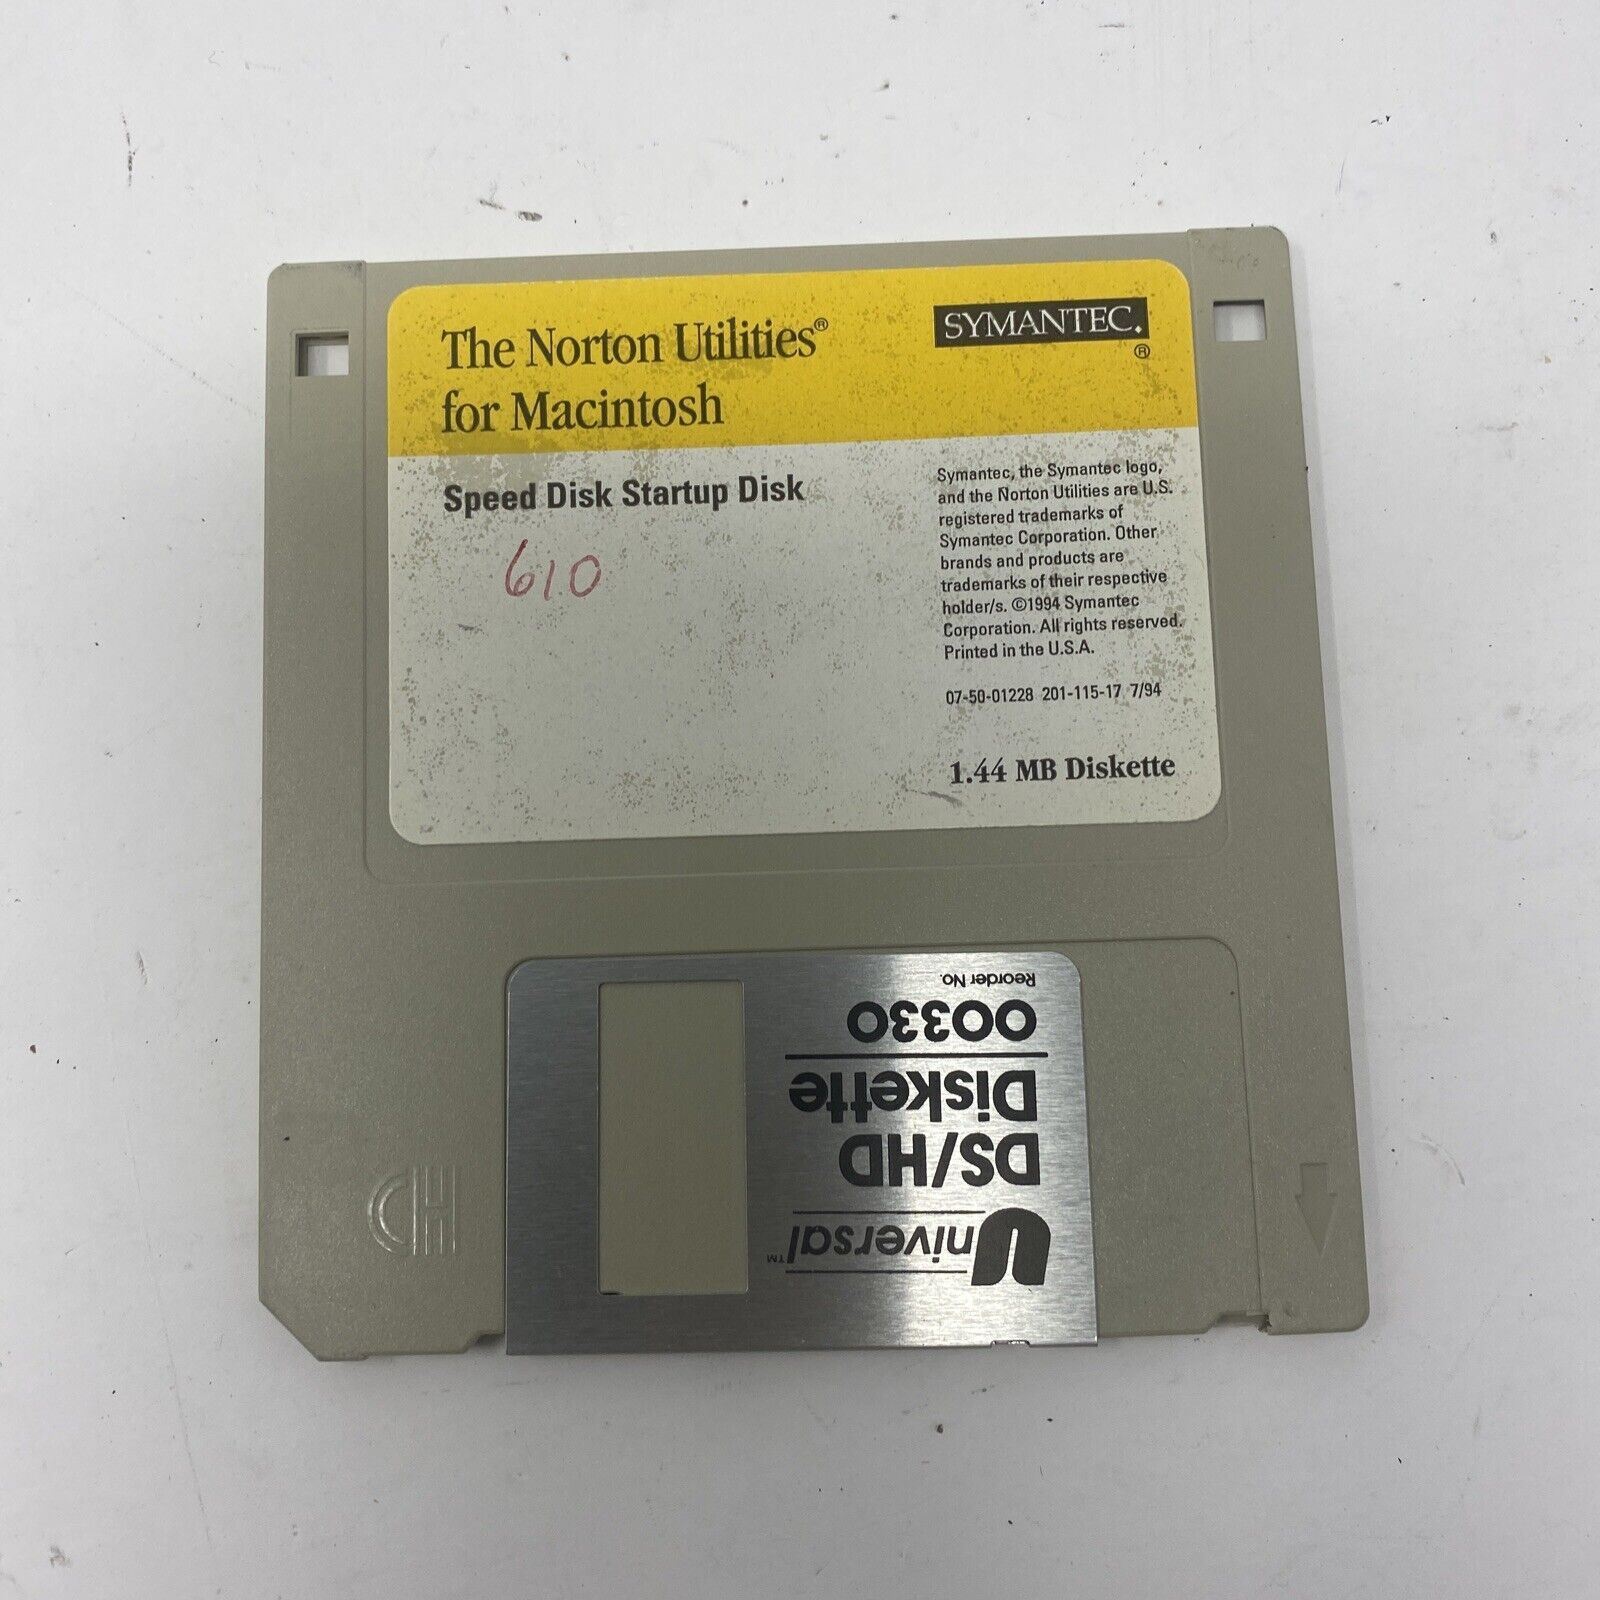 The Norton Utilities for Macintosh speed this start up disk floppy